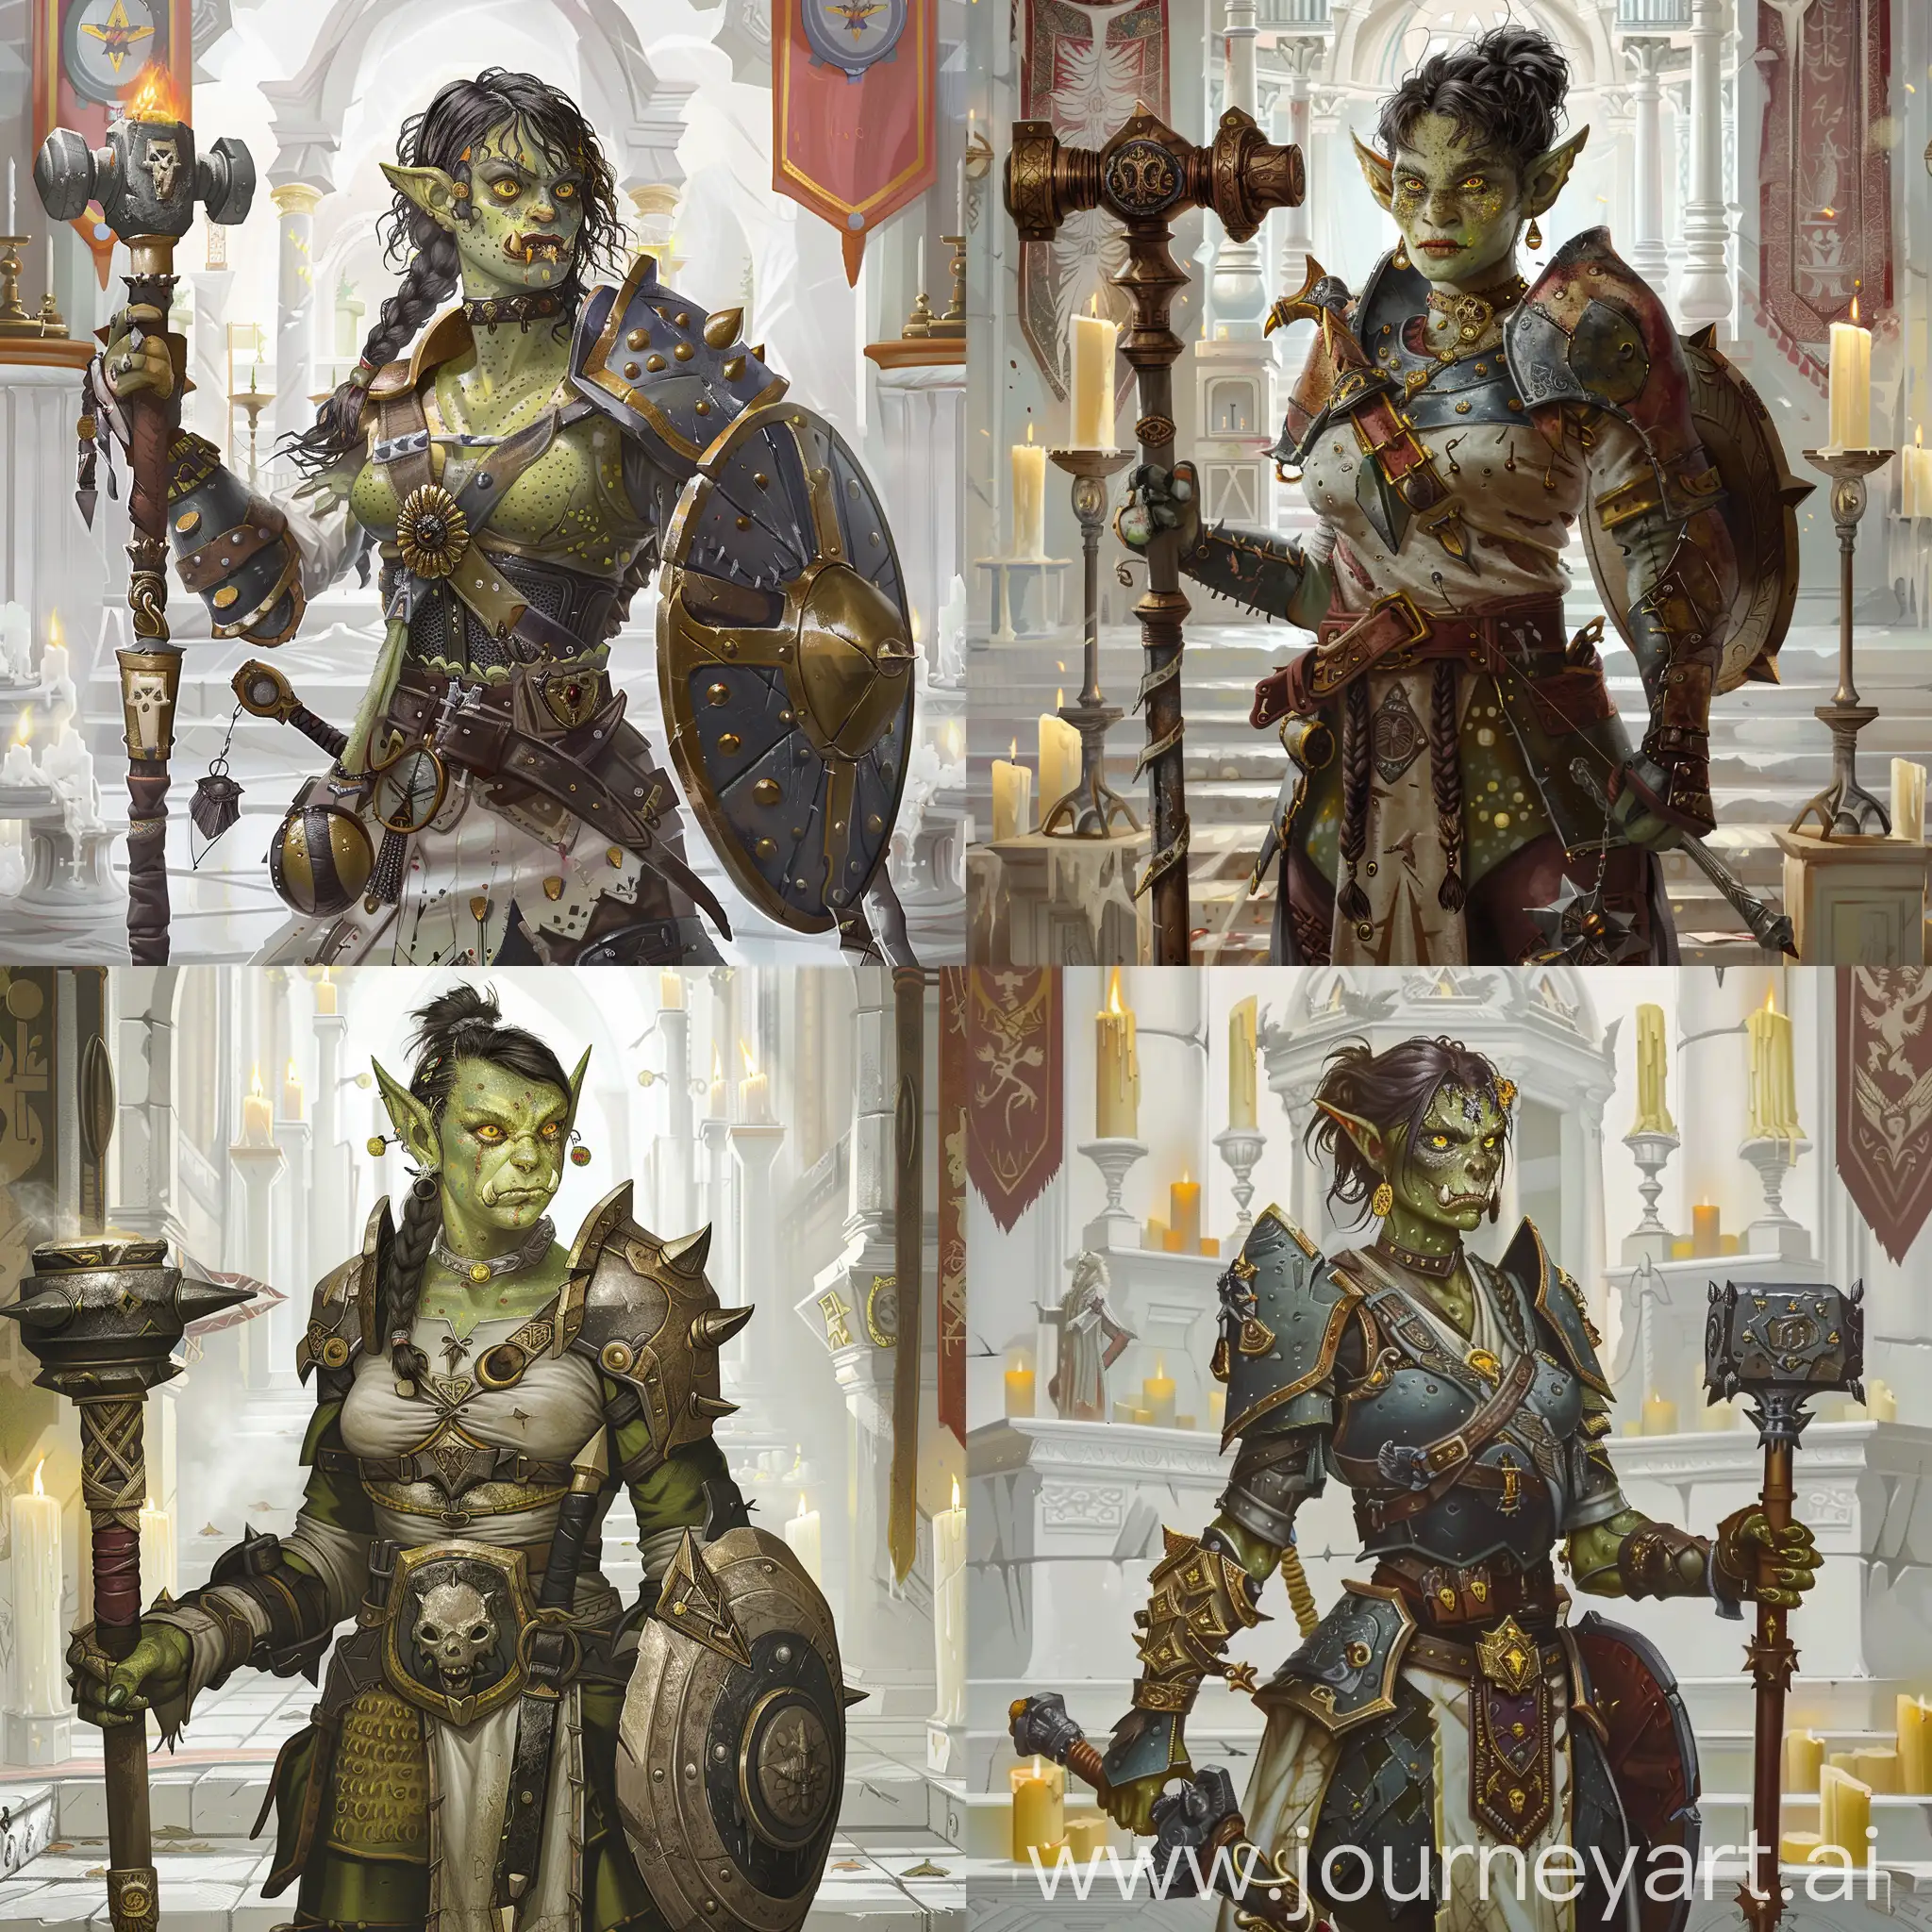 Female-Orc-Priest-in-Medieval-Warrior-Attire-with-Mace-and-Shield